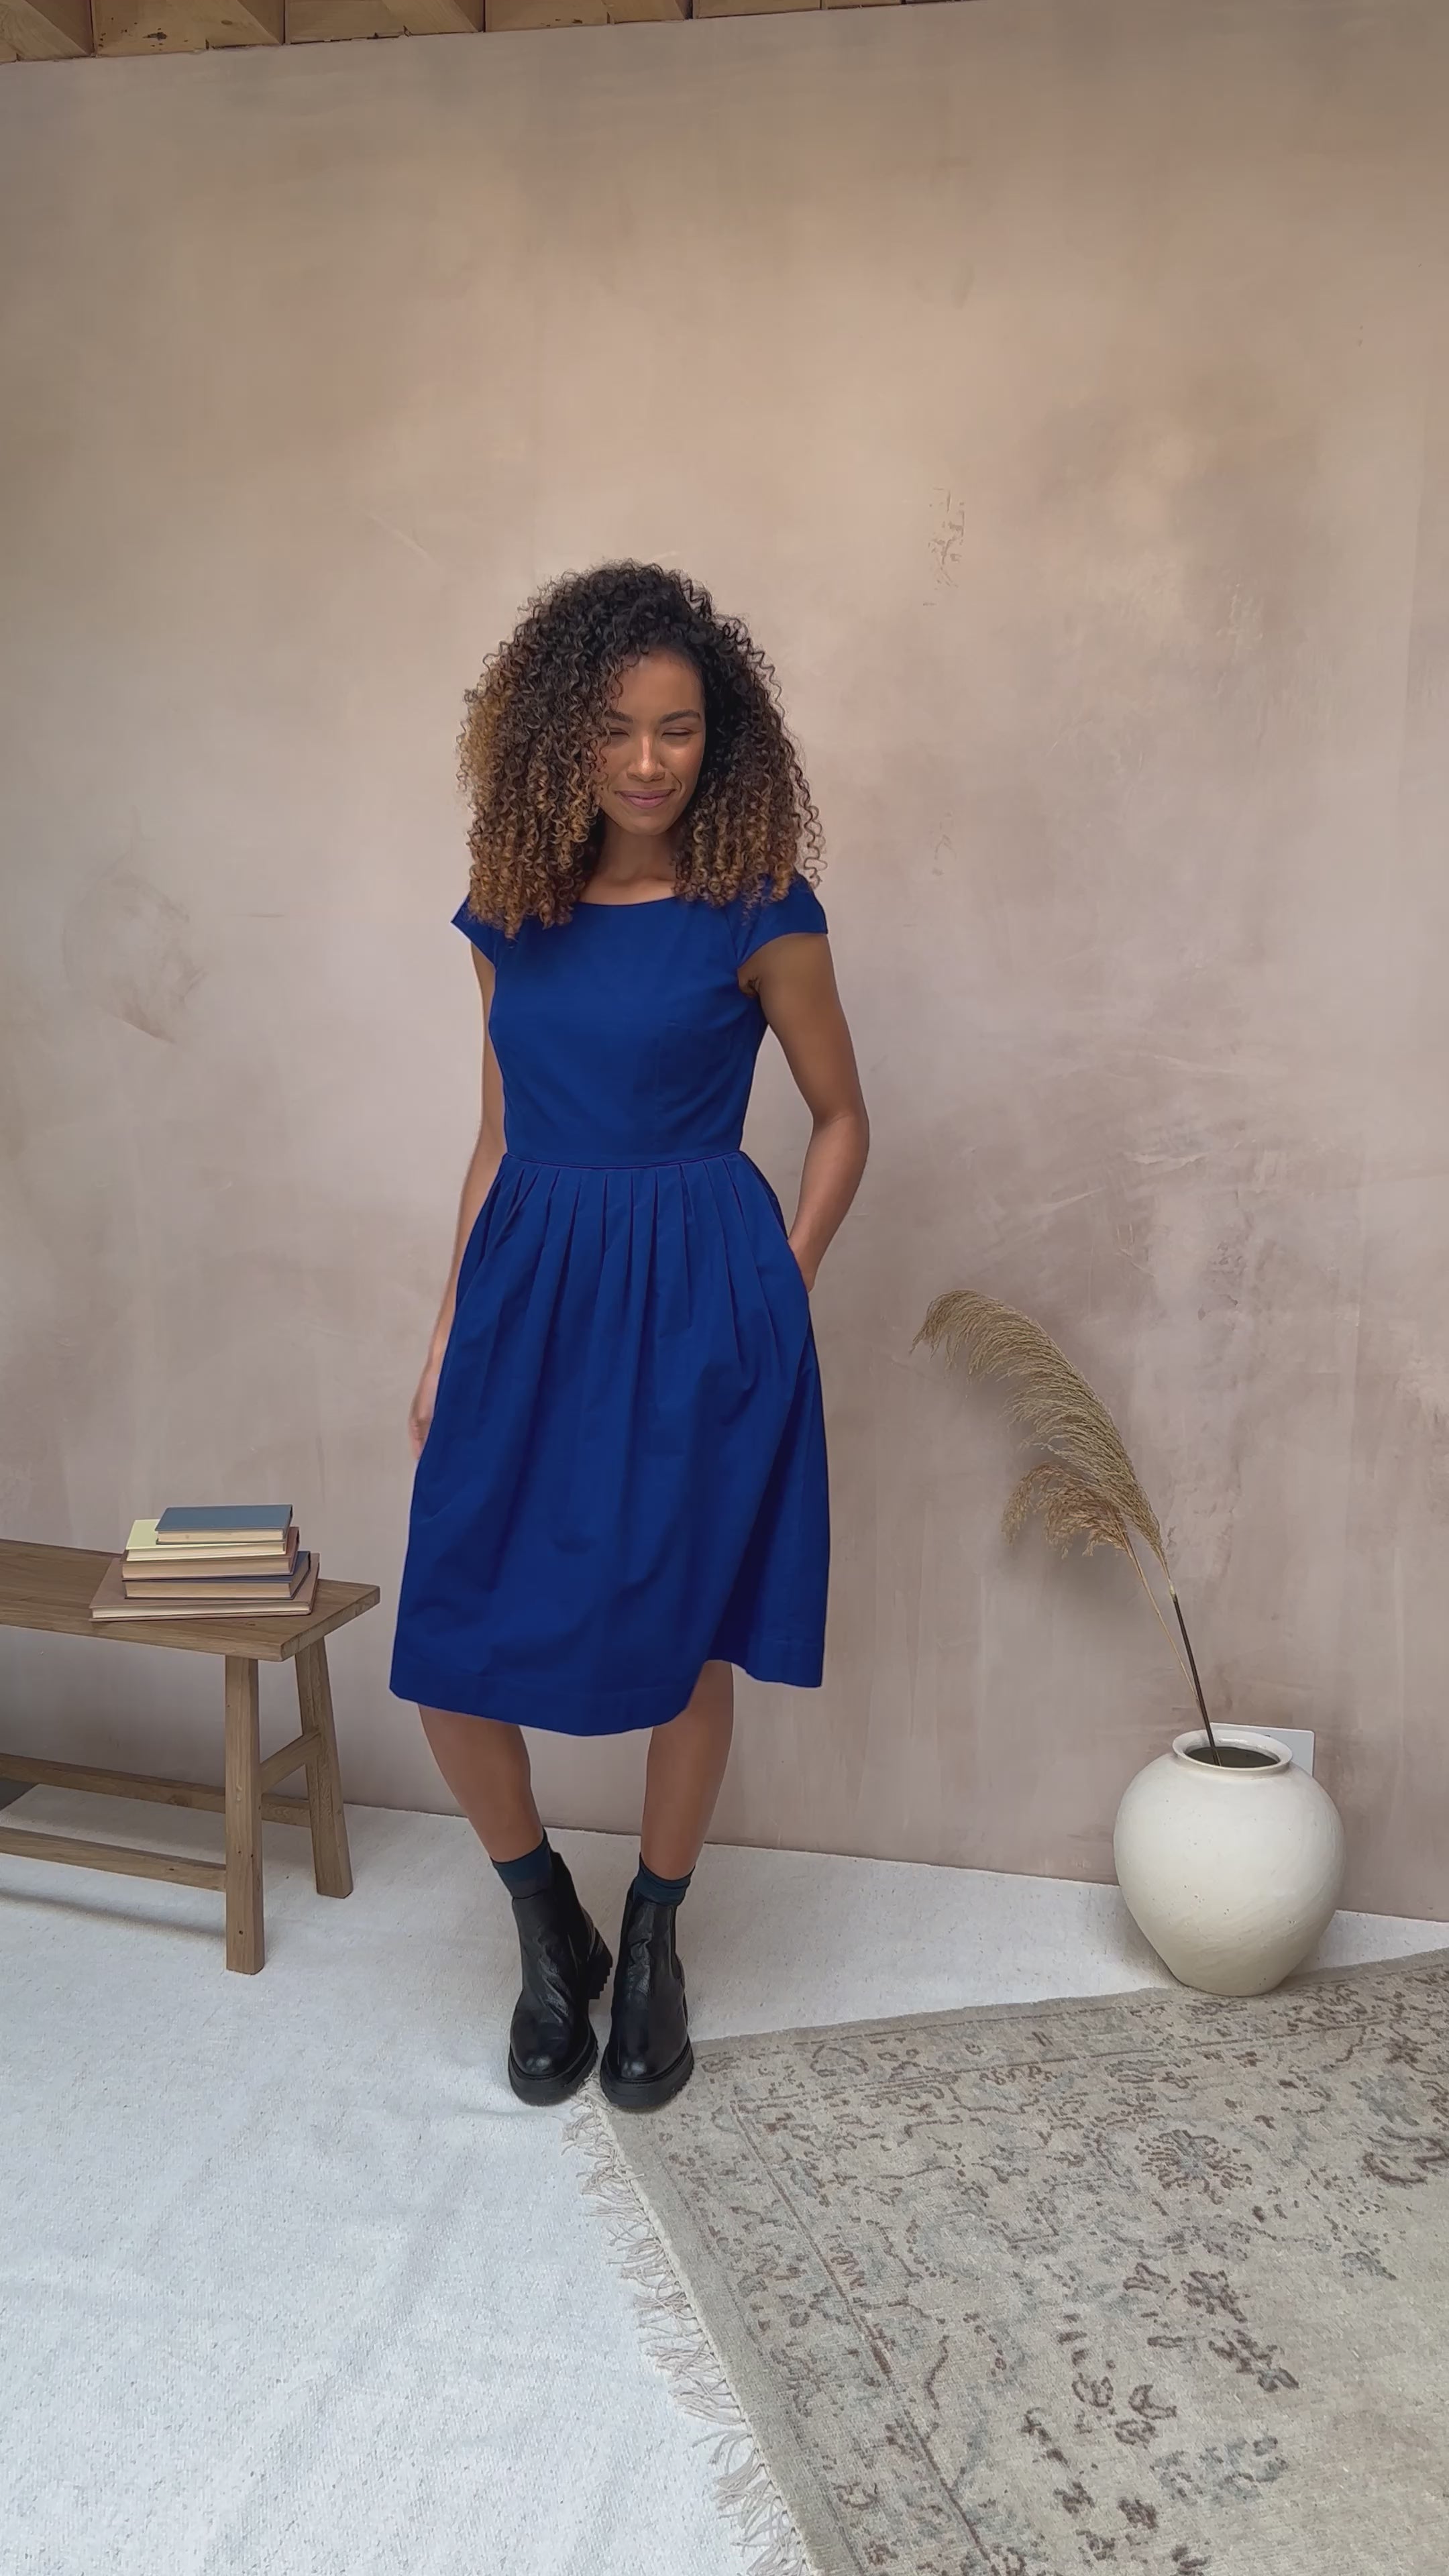 Image of the Claudia Dress in Cobalt Needlecord by Emily and Fin, presented in a video.